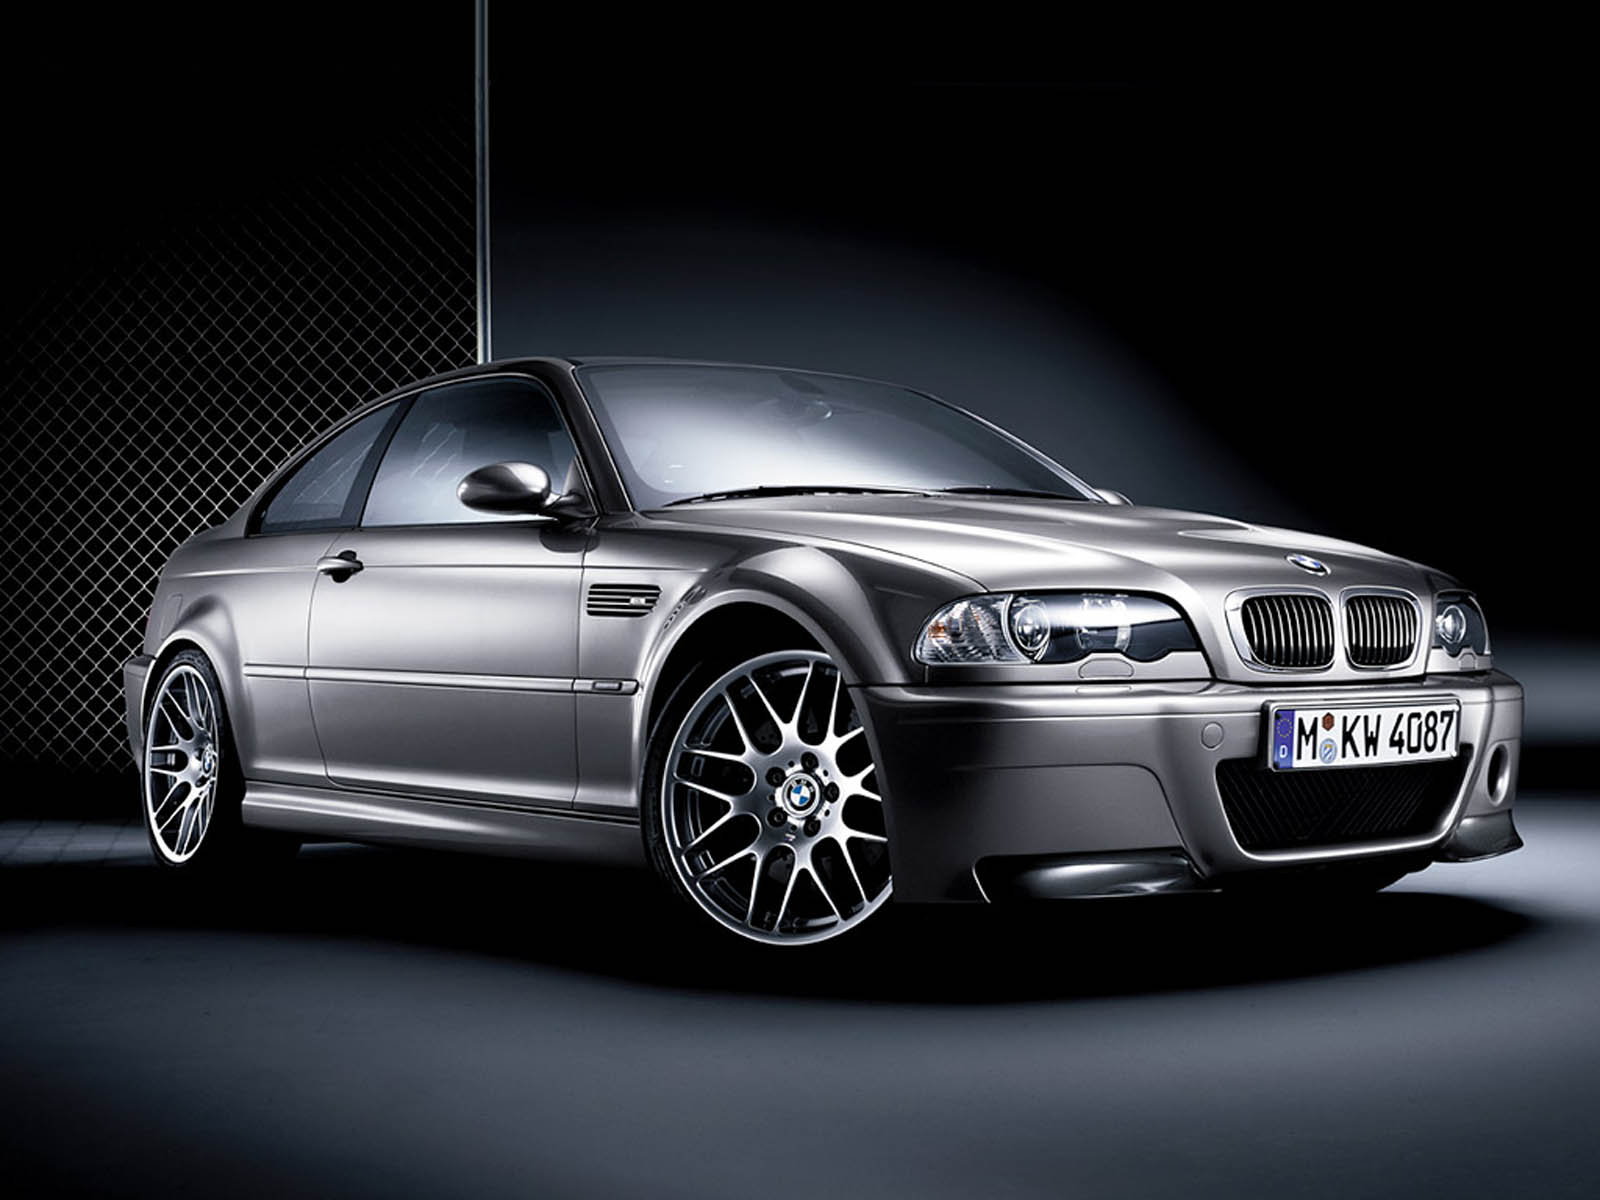 Gallery For Gt Bmw E46 M3 Wallpaper